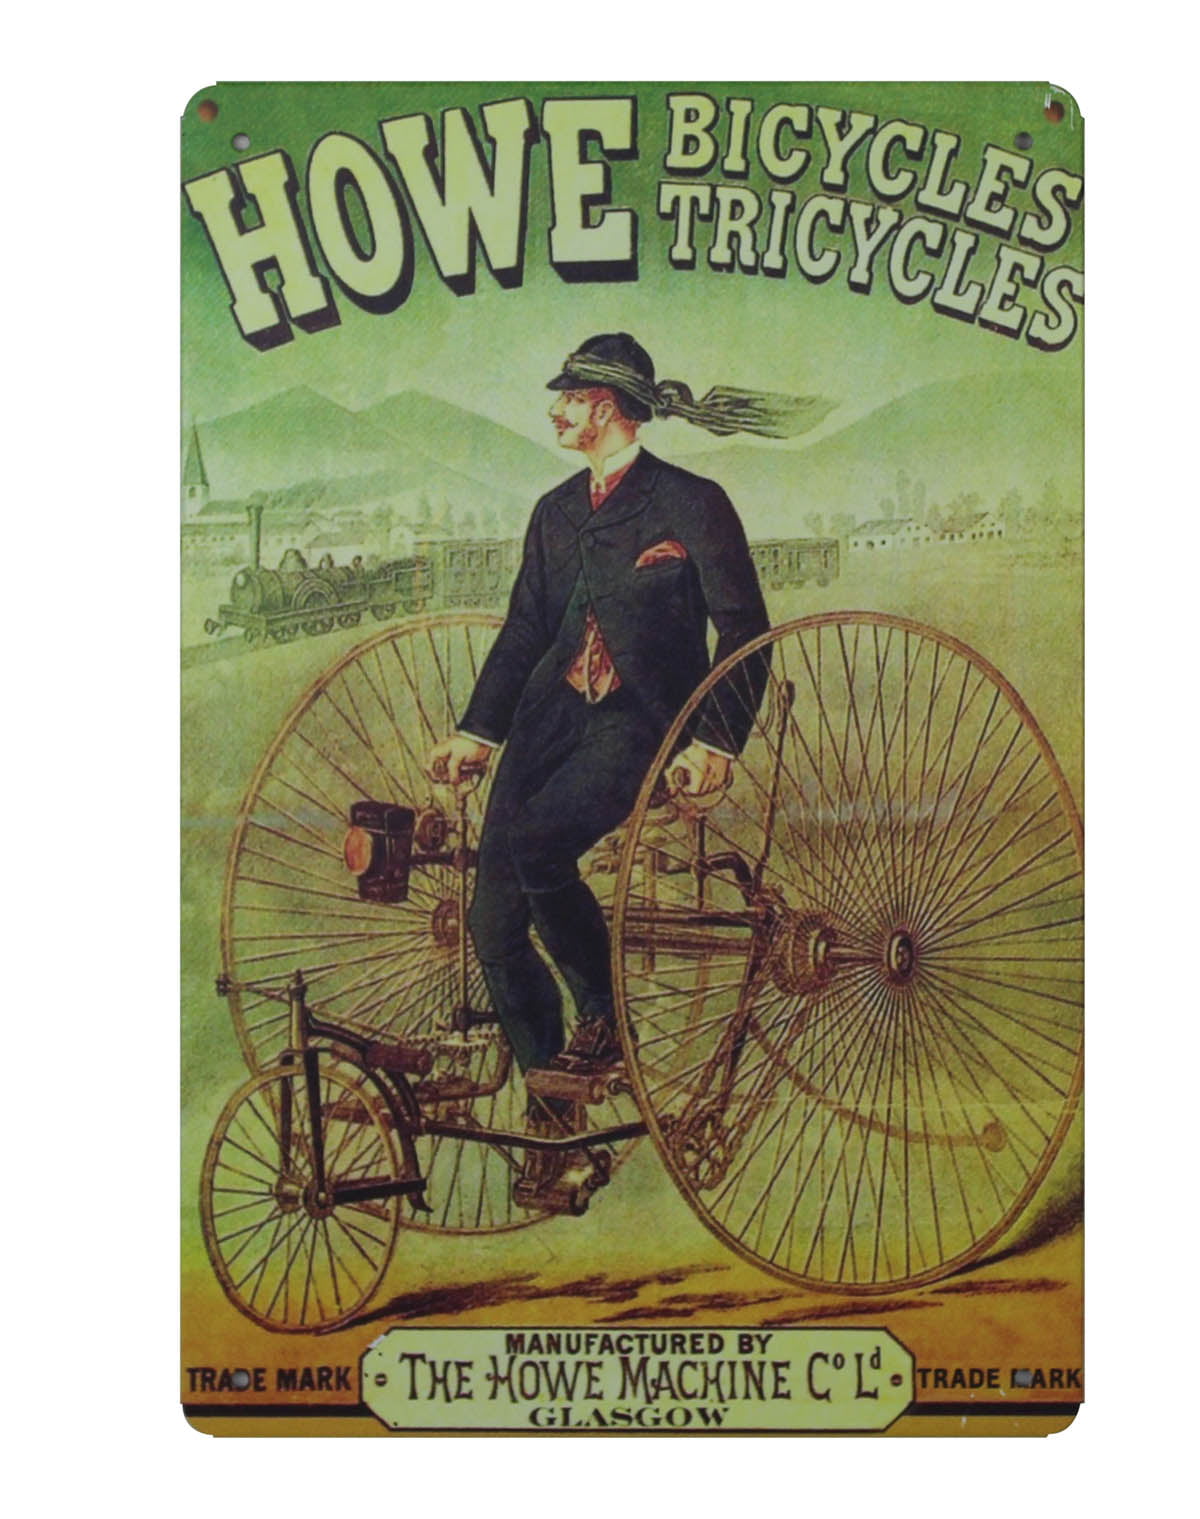 howe bicycles tricycles